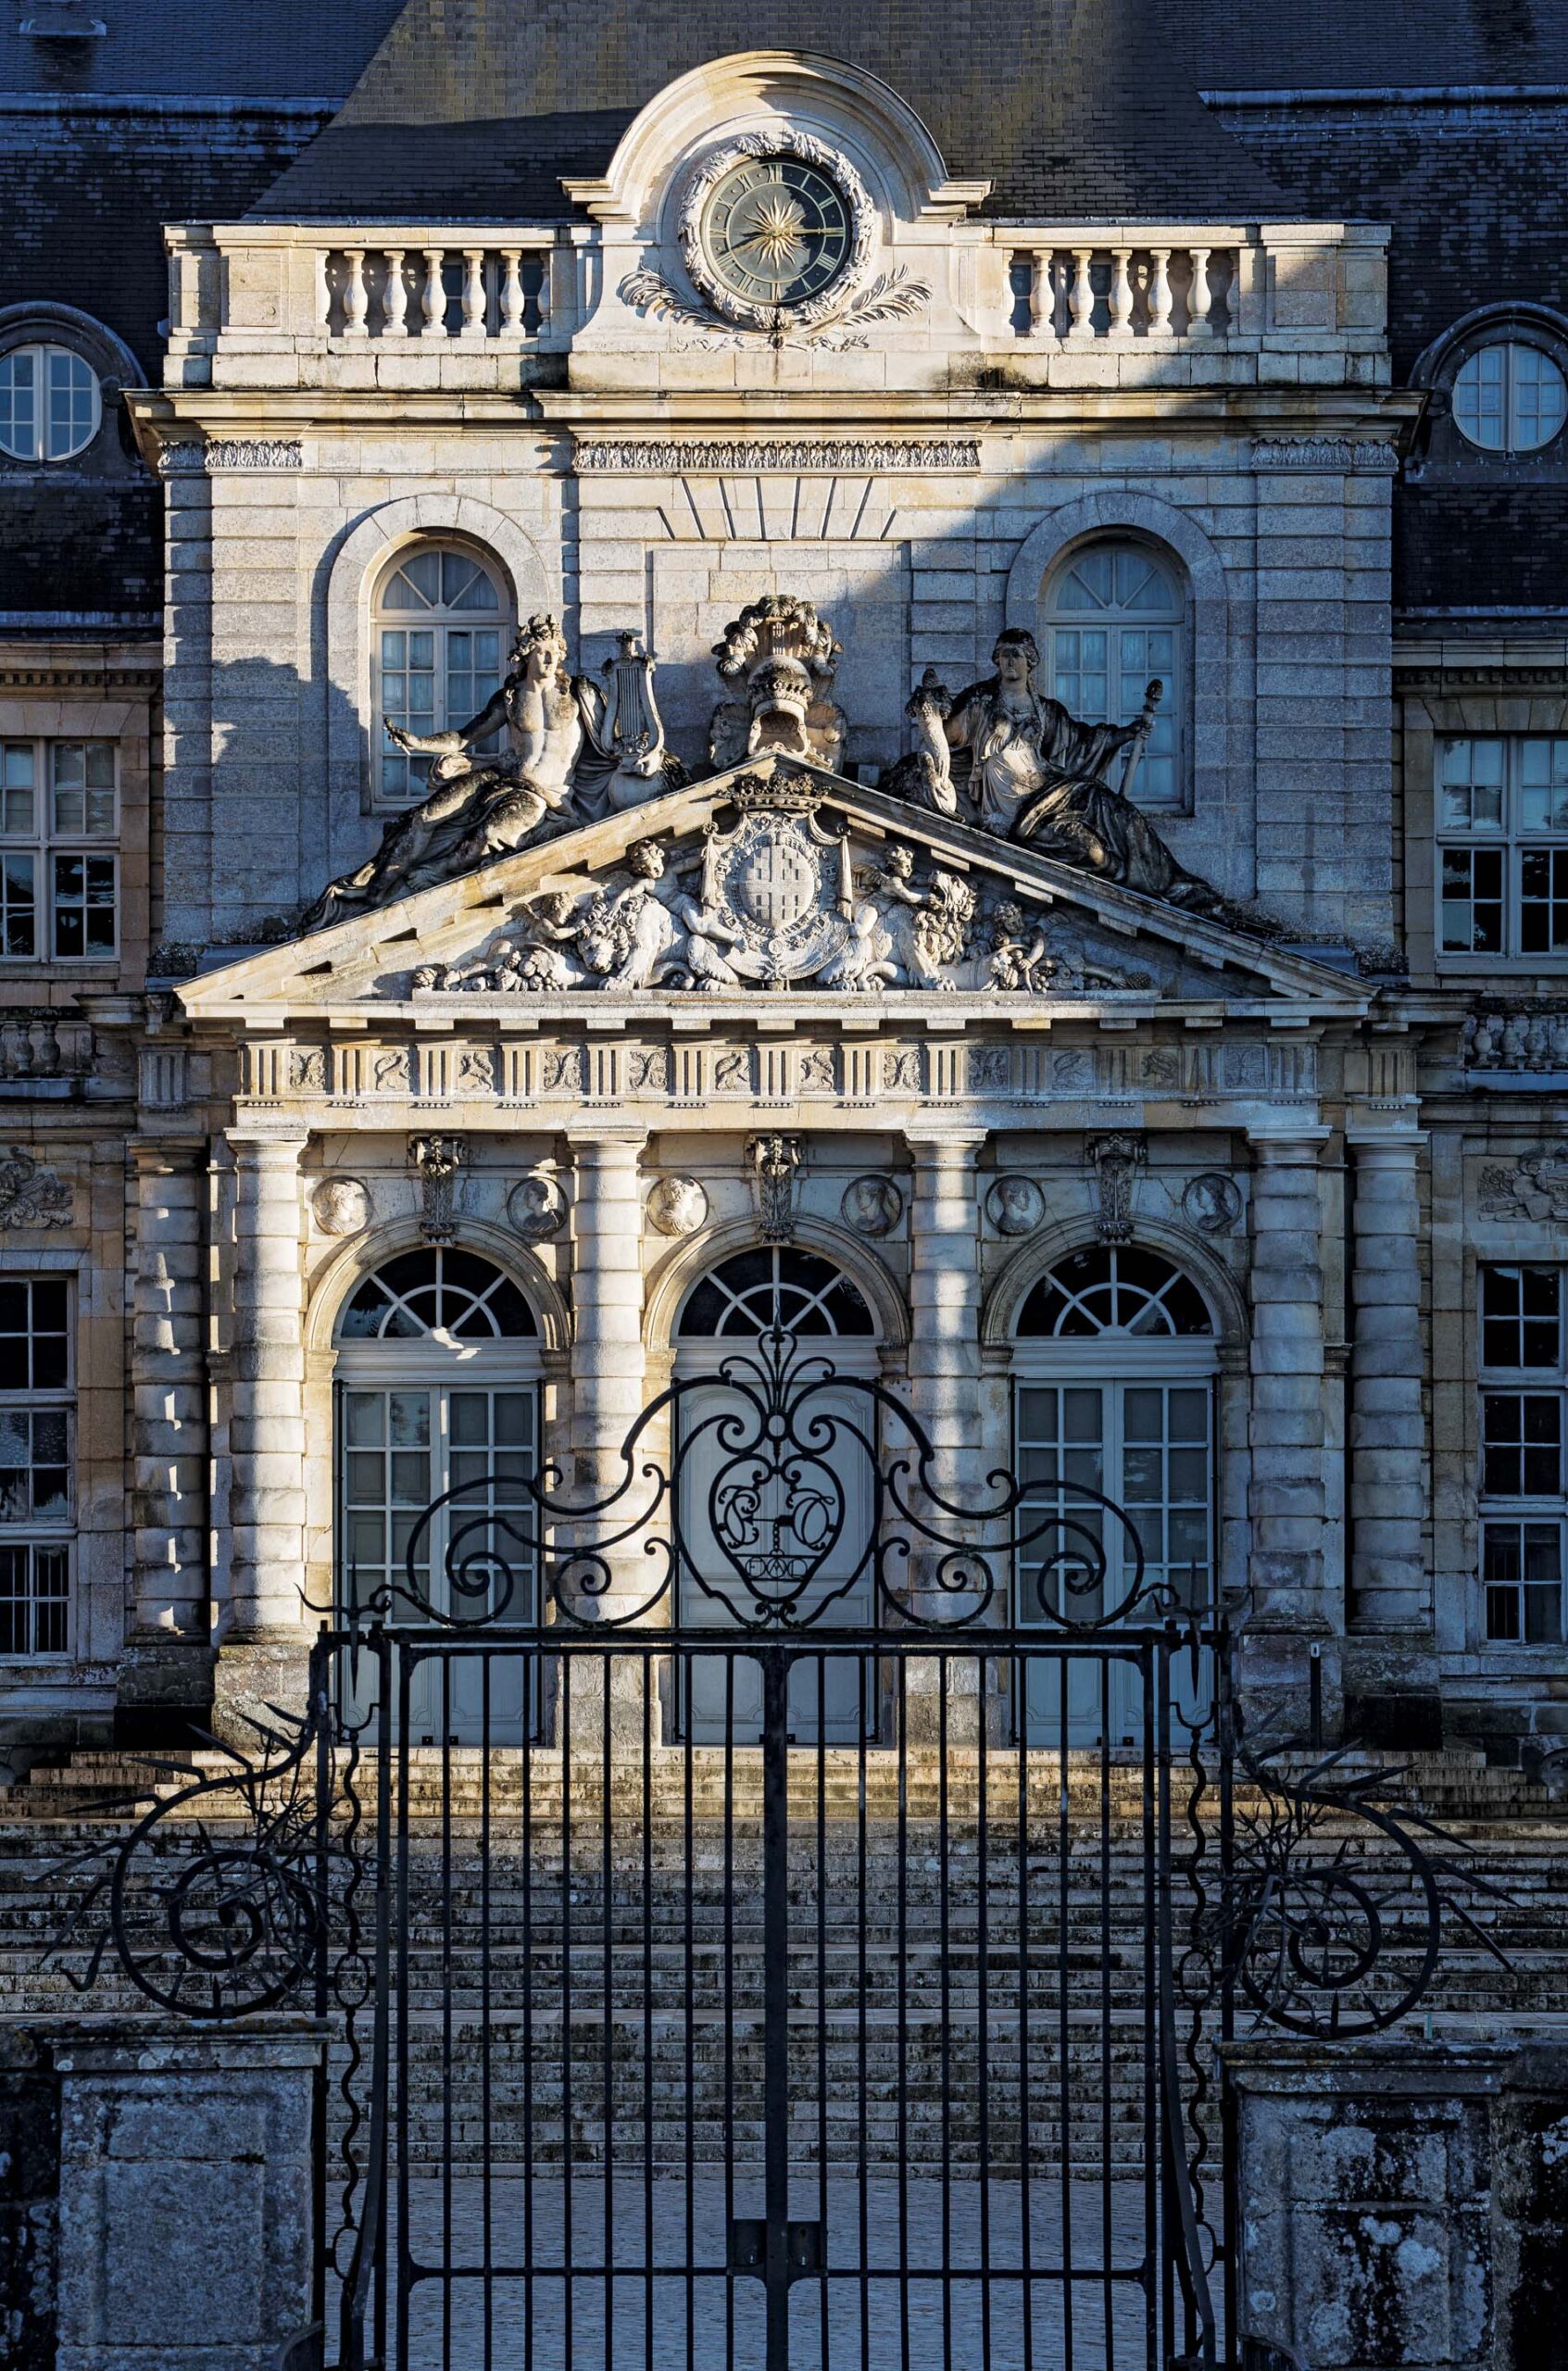 Vaux-le-Vicomte: The History of Chateau and its Owner, Nicolas